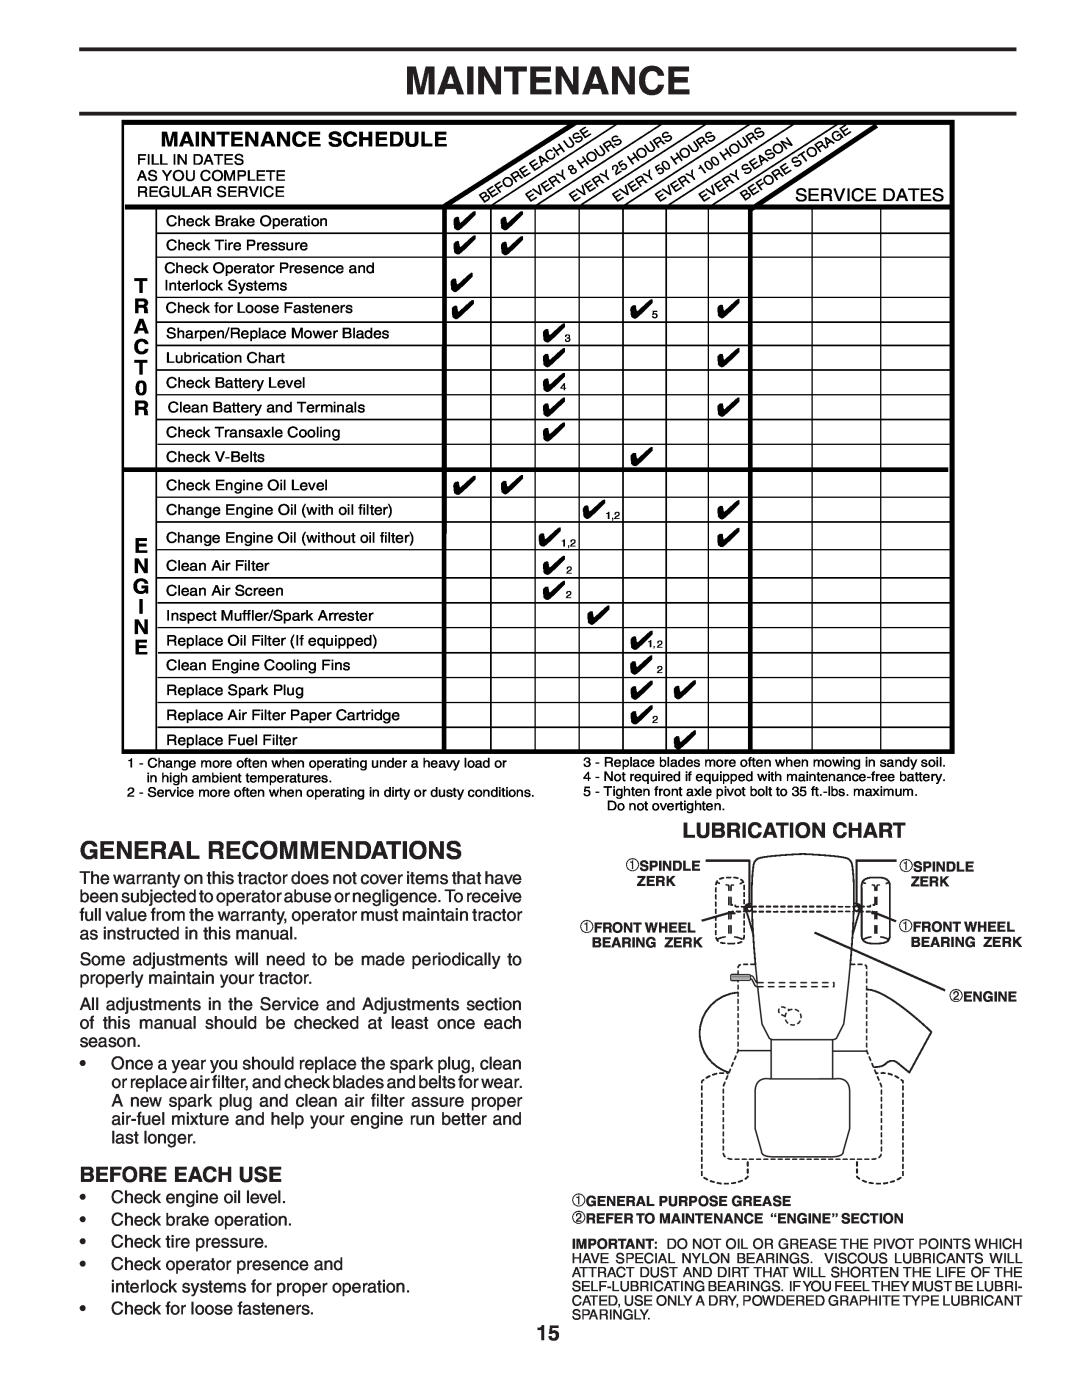 Husqvarna LTH1742 owner manual Maintenance, General Recommendations, Lubrication Chart, Before Each Use 